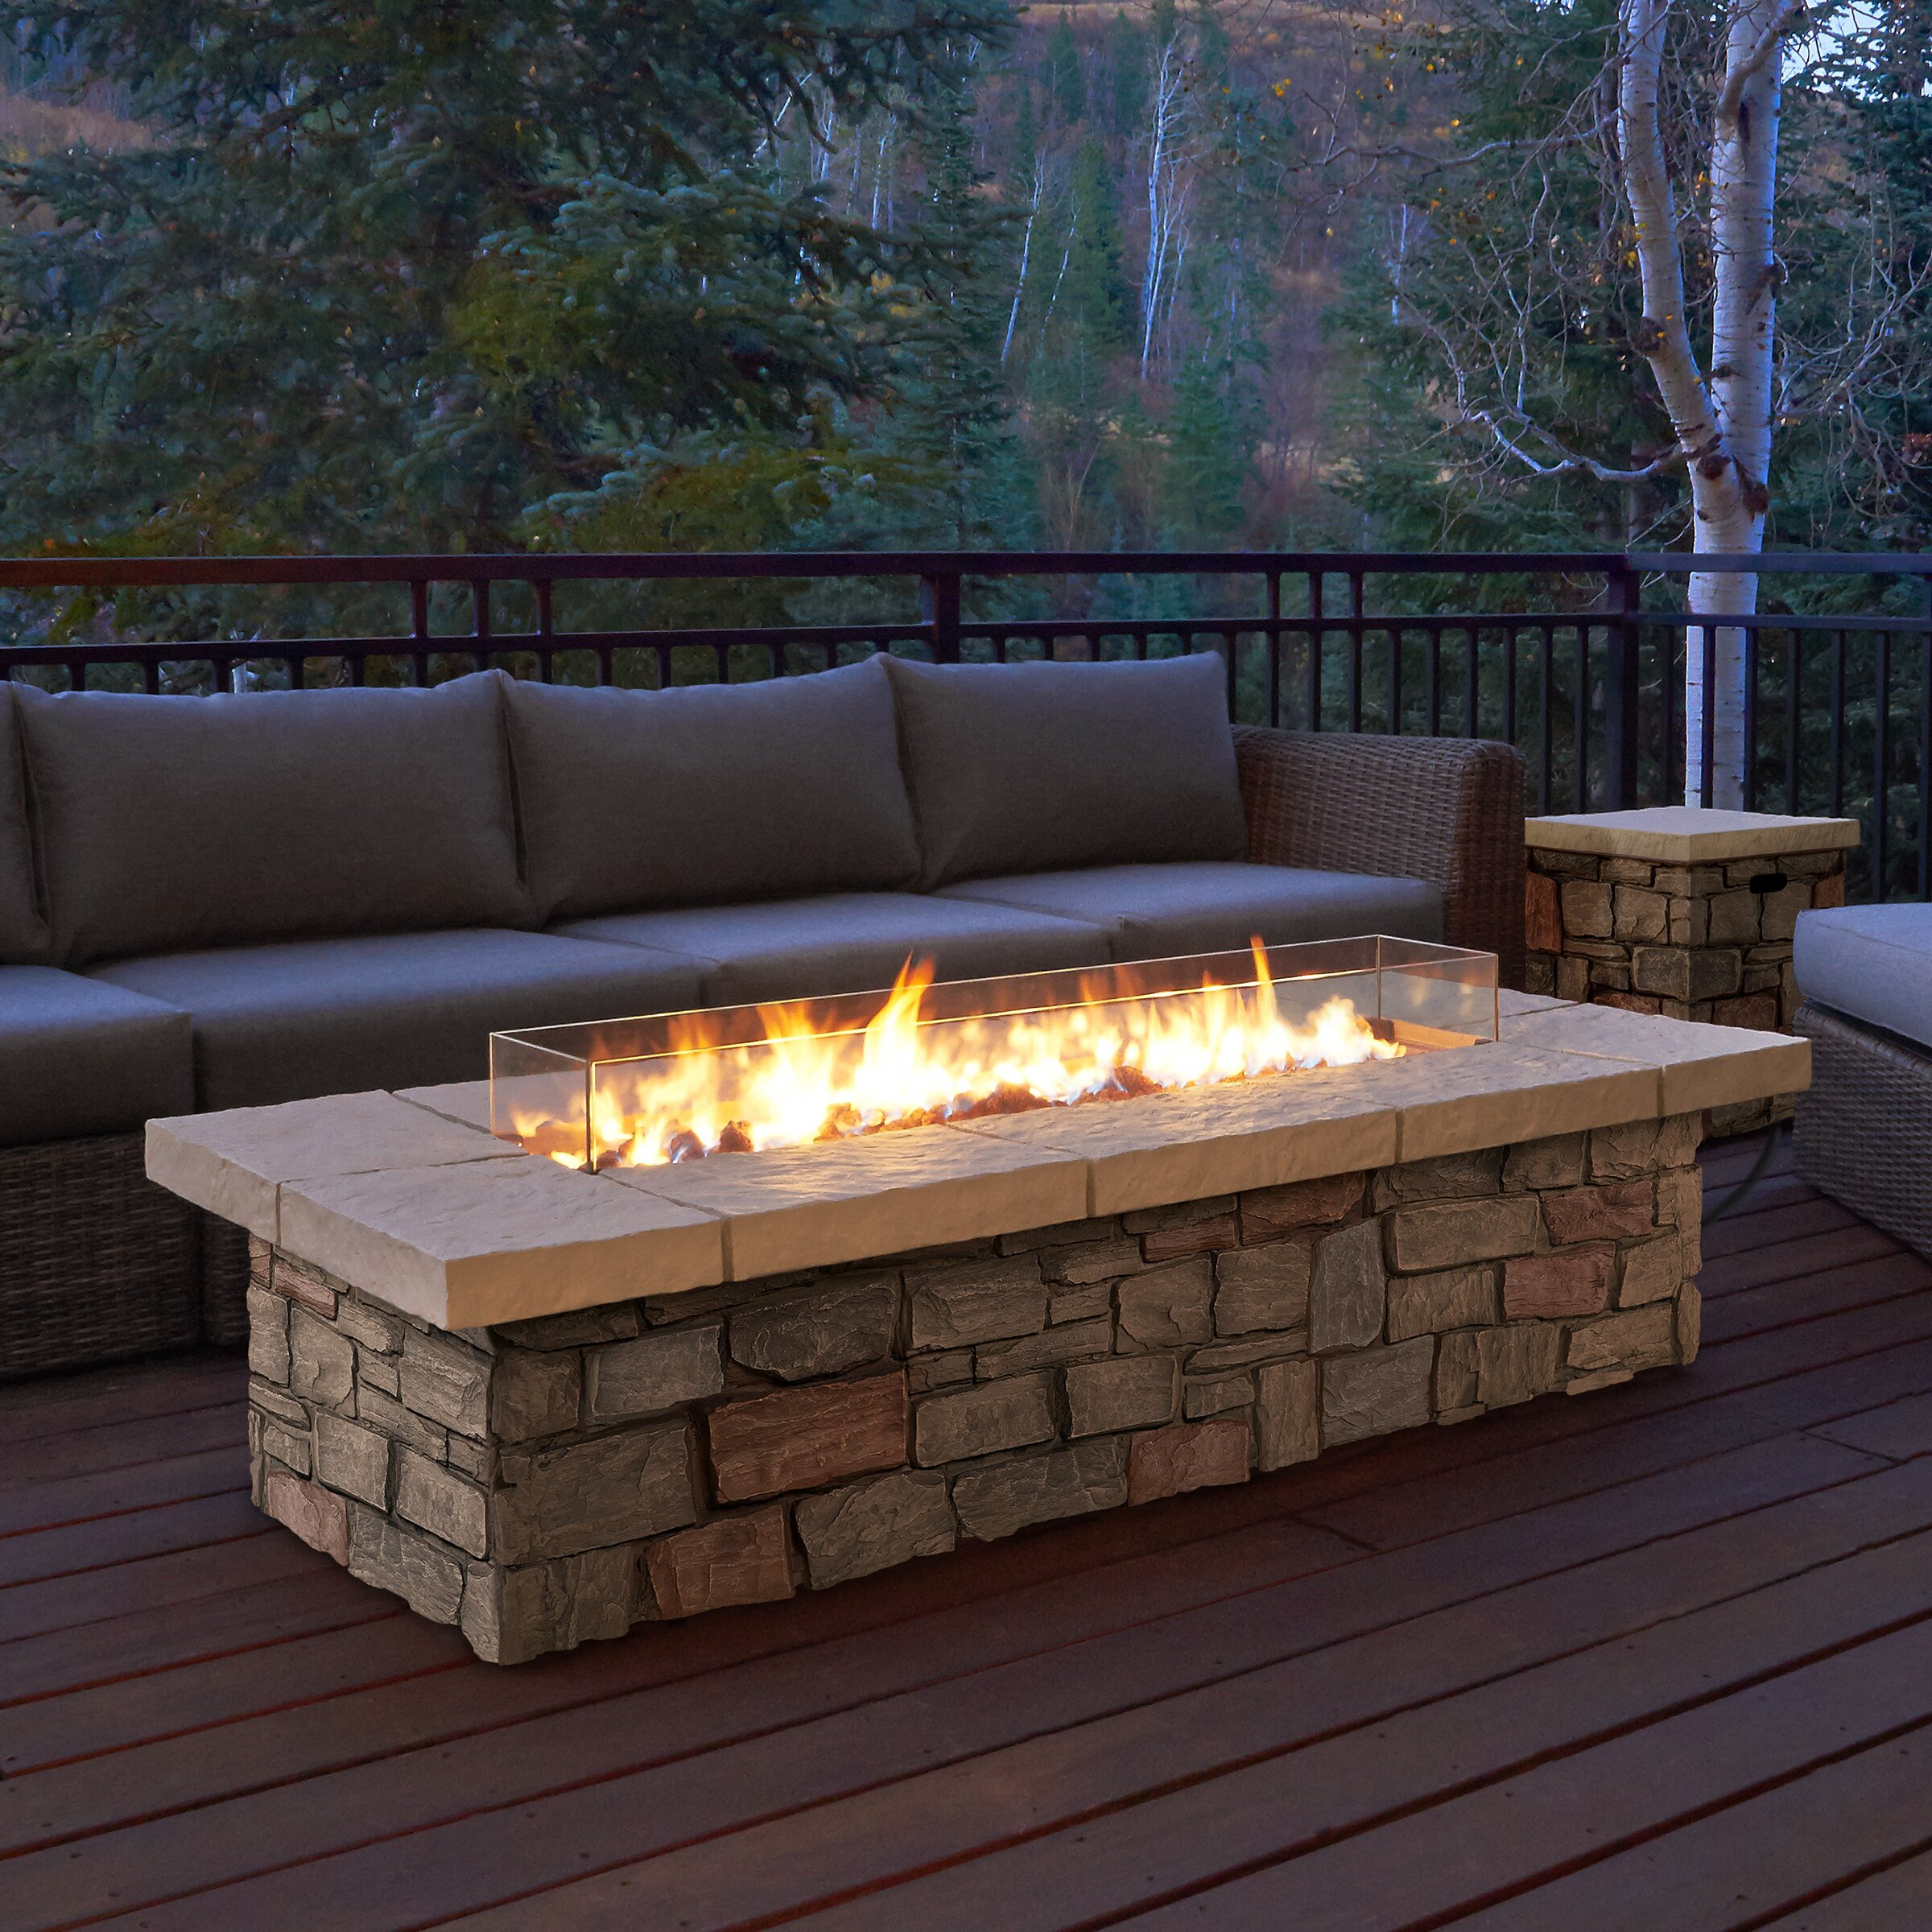 Outdoor Fire Pit Propane
 Real Flame Sedona Propane Fire Pit Table & Reviews